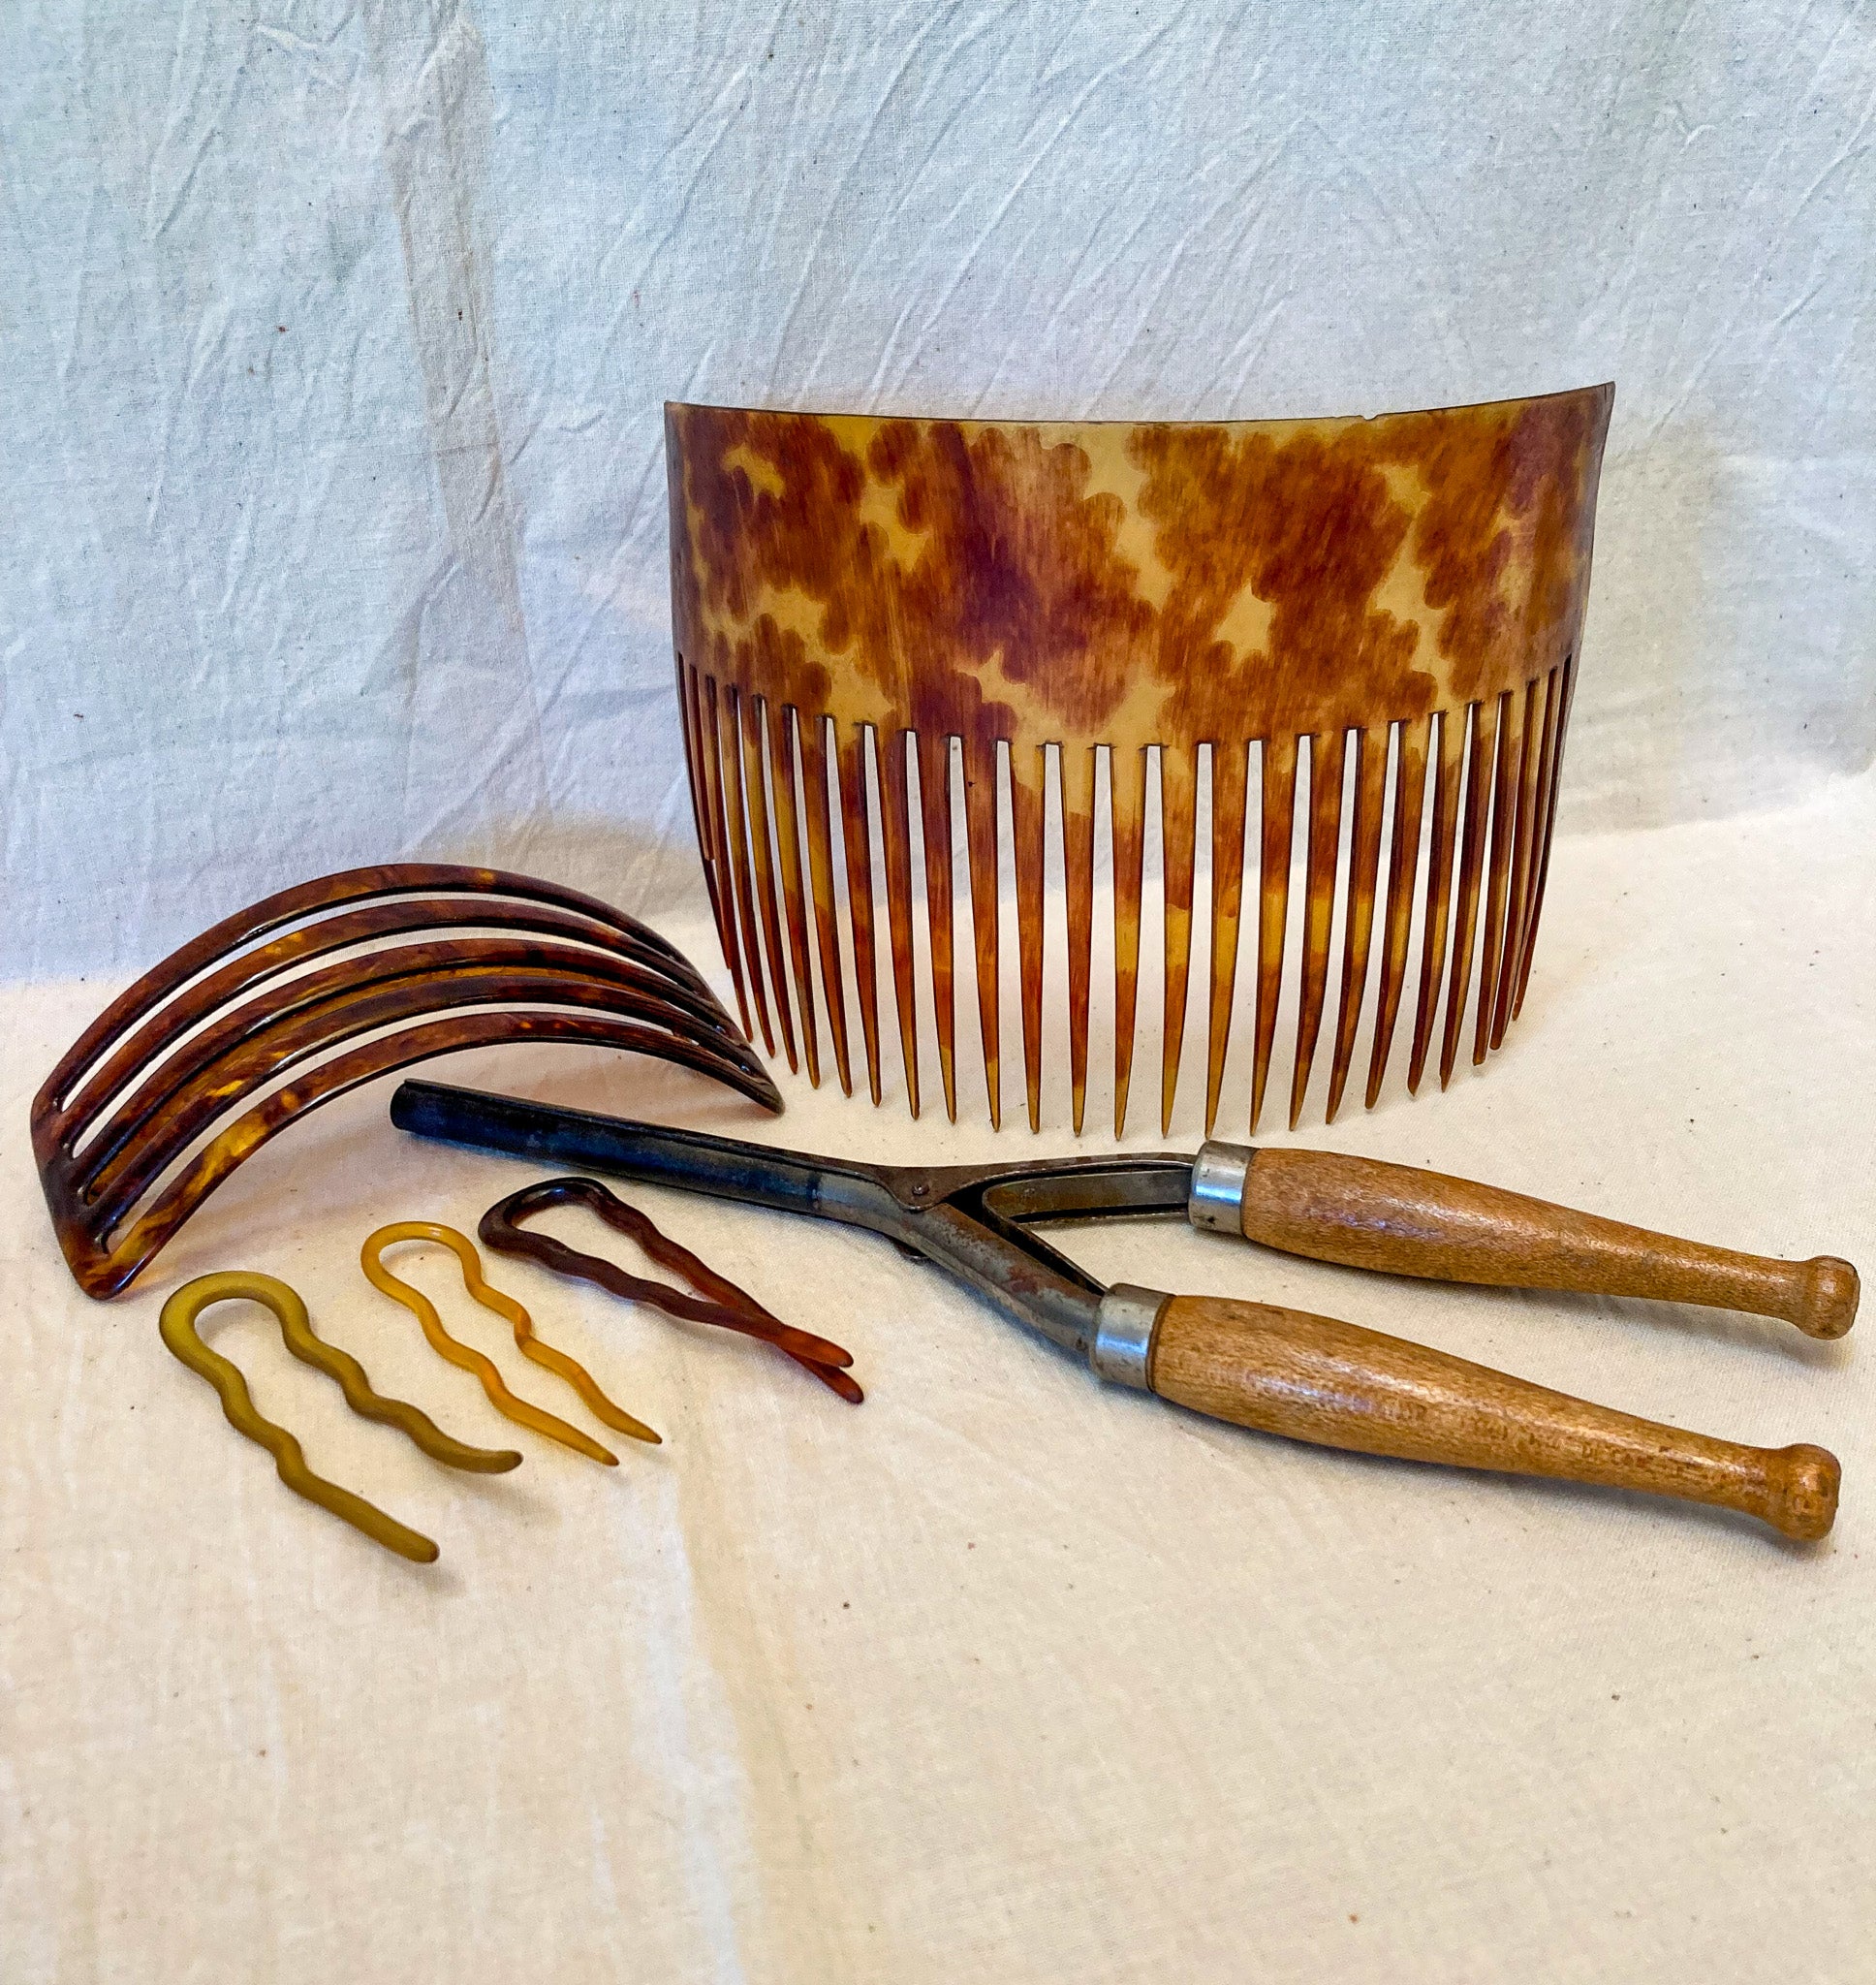 Victorian Hair Accessories!  Huge Faux Tortoise Shell Comb, Large Faux Tortoise Shell Barrette, Set of 3 Celluloid Hair Pins, Curling Iron with Wooden Handles